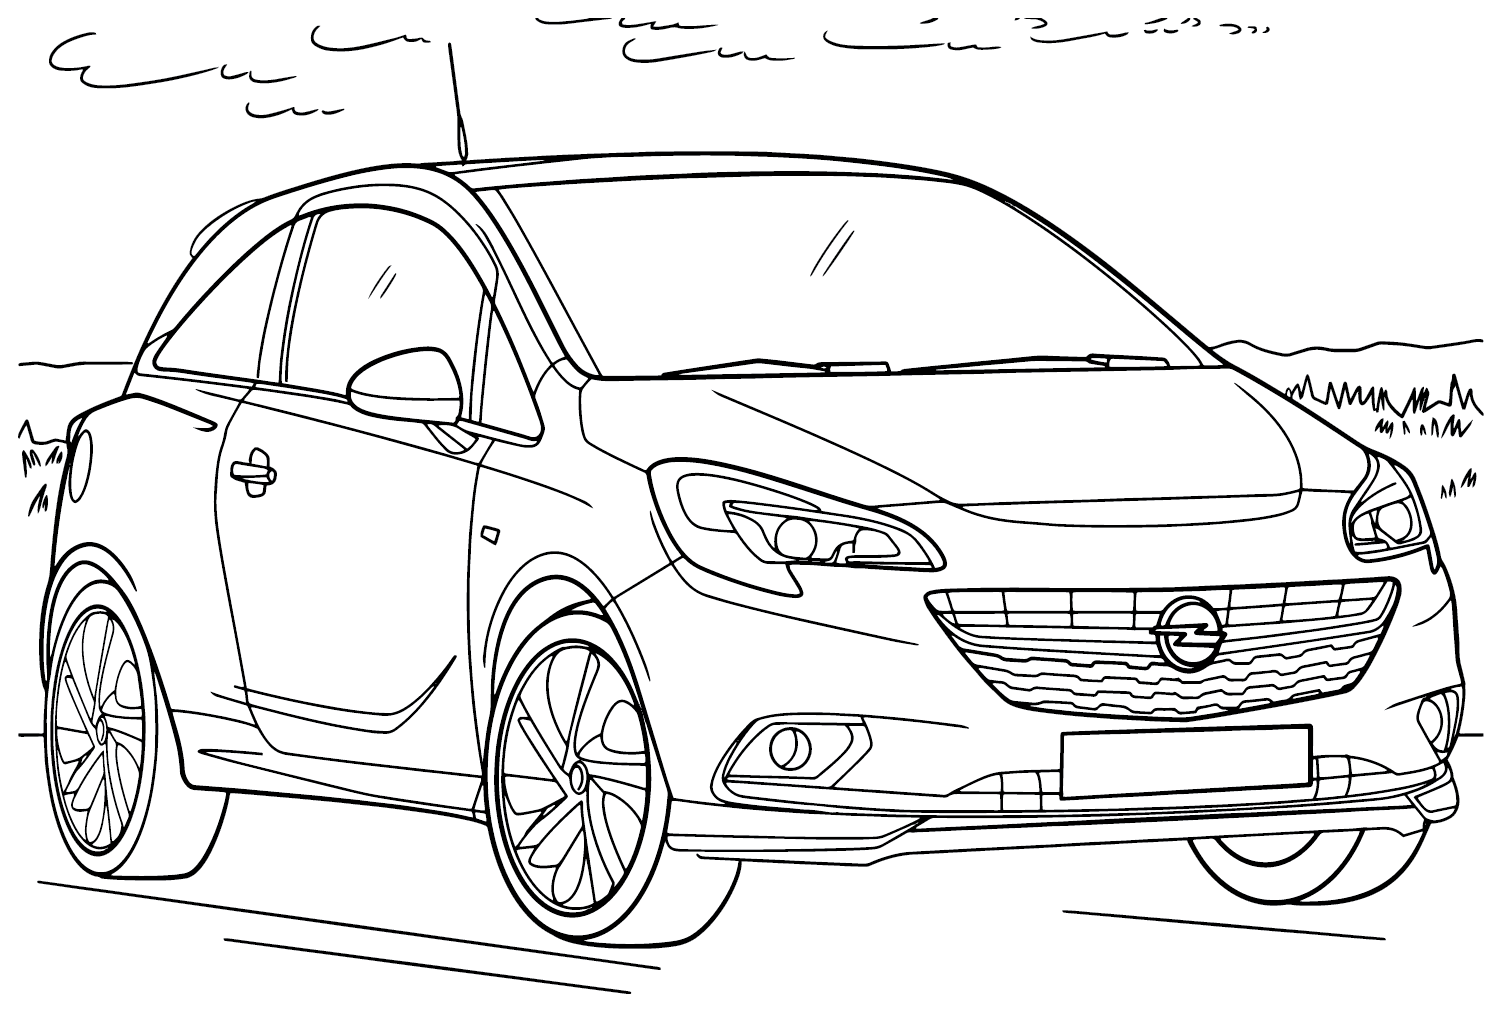 Opel Corsa Coloring Page from Opel